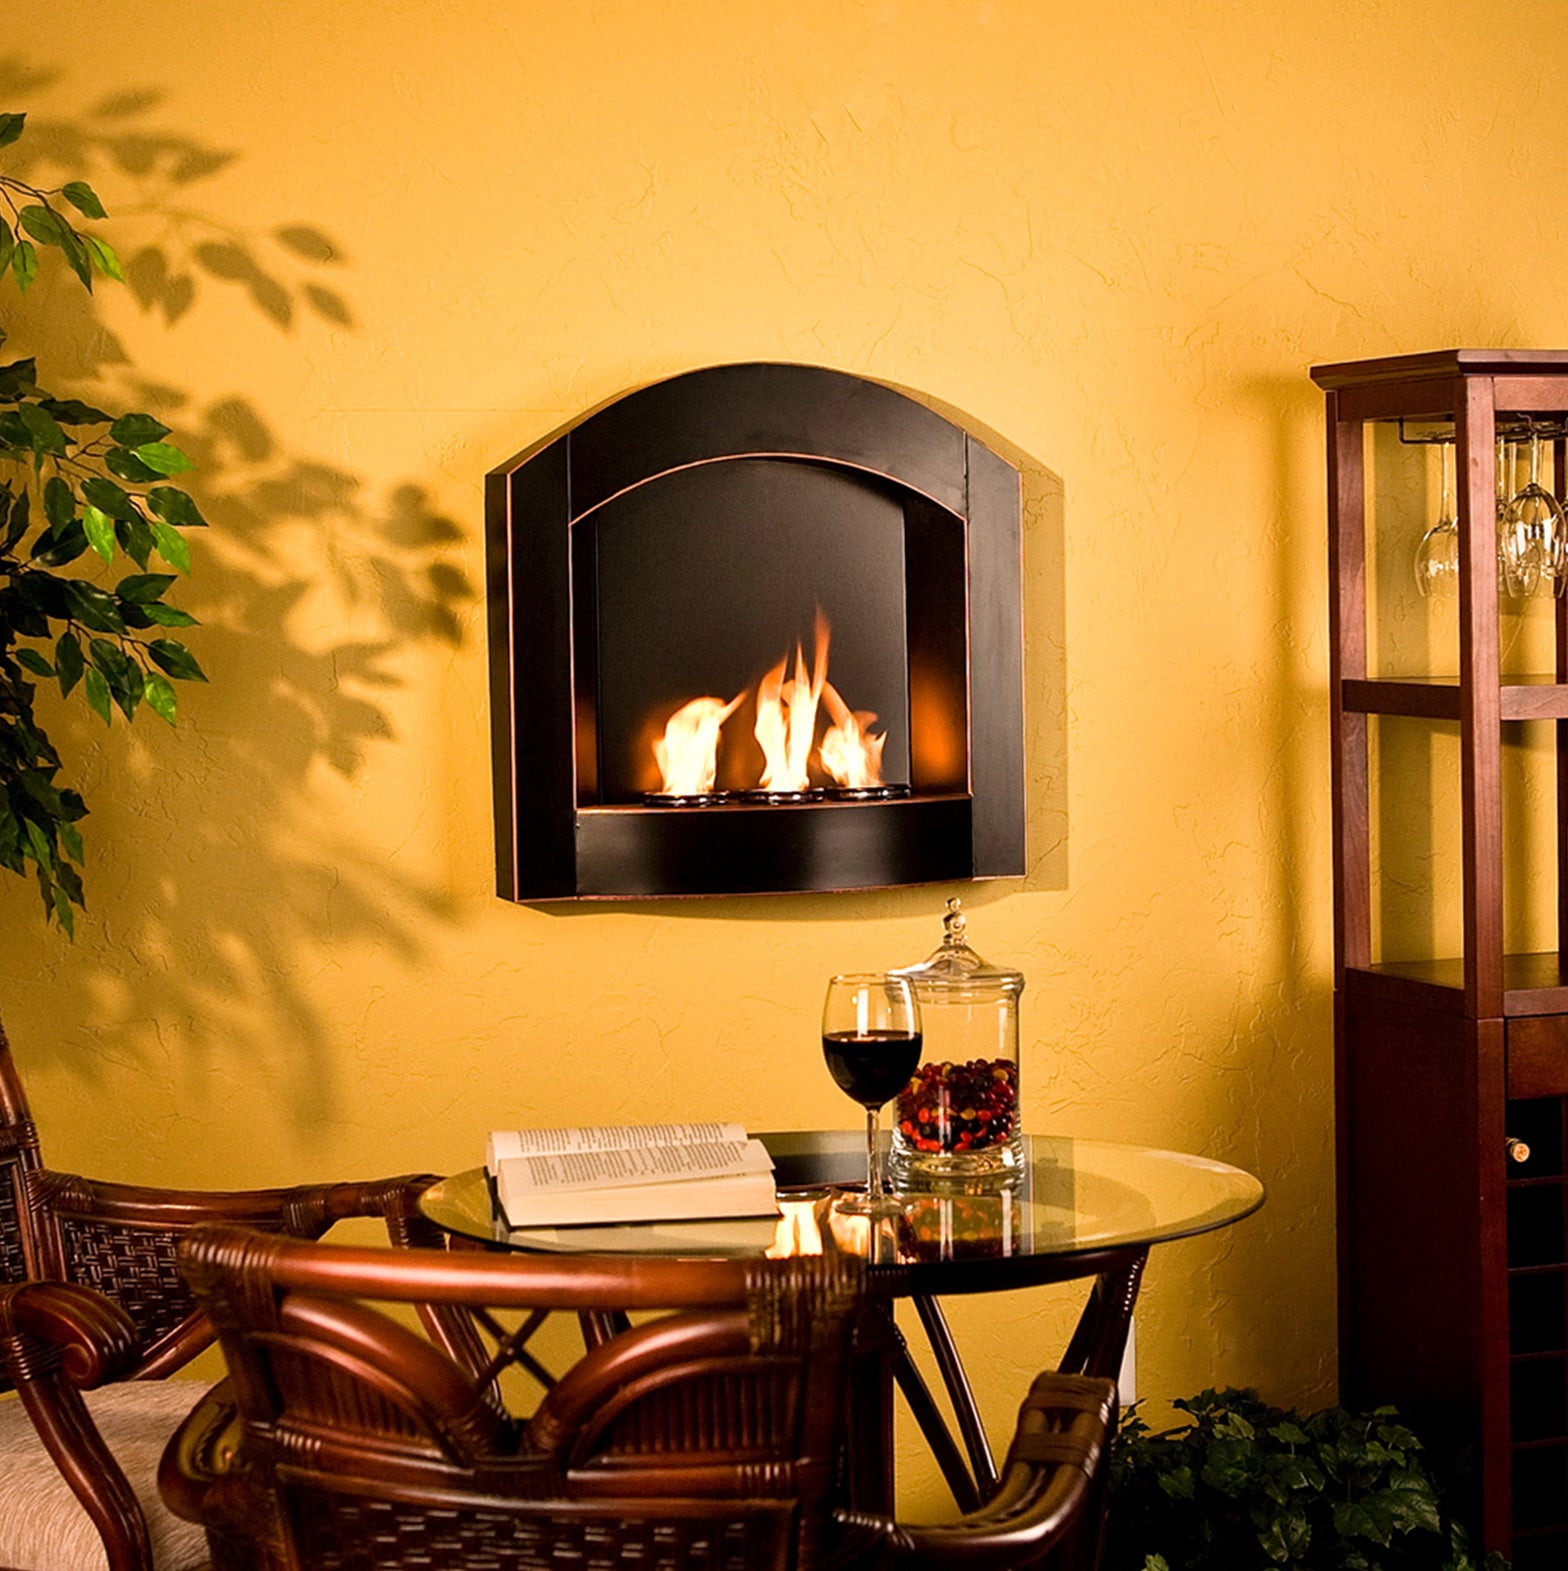 DO GAS FIREPLACES NEED A CHIMNEY?